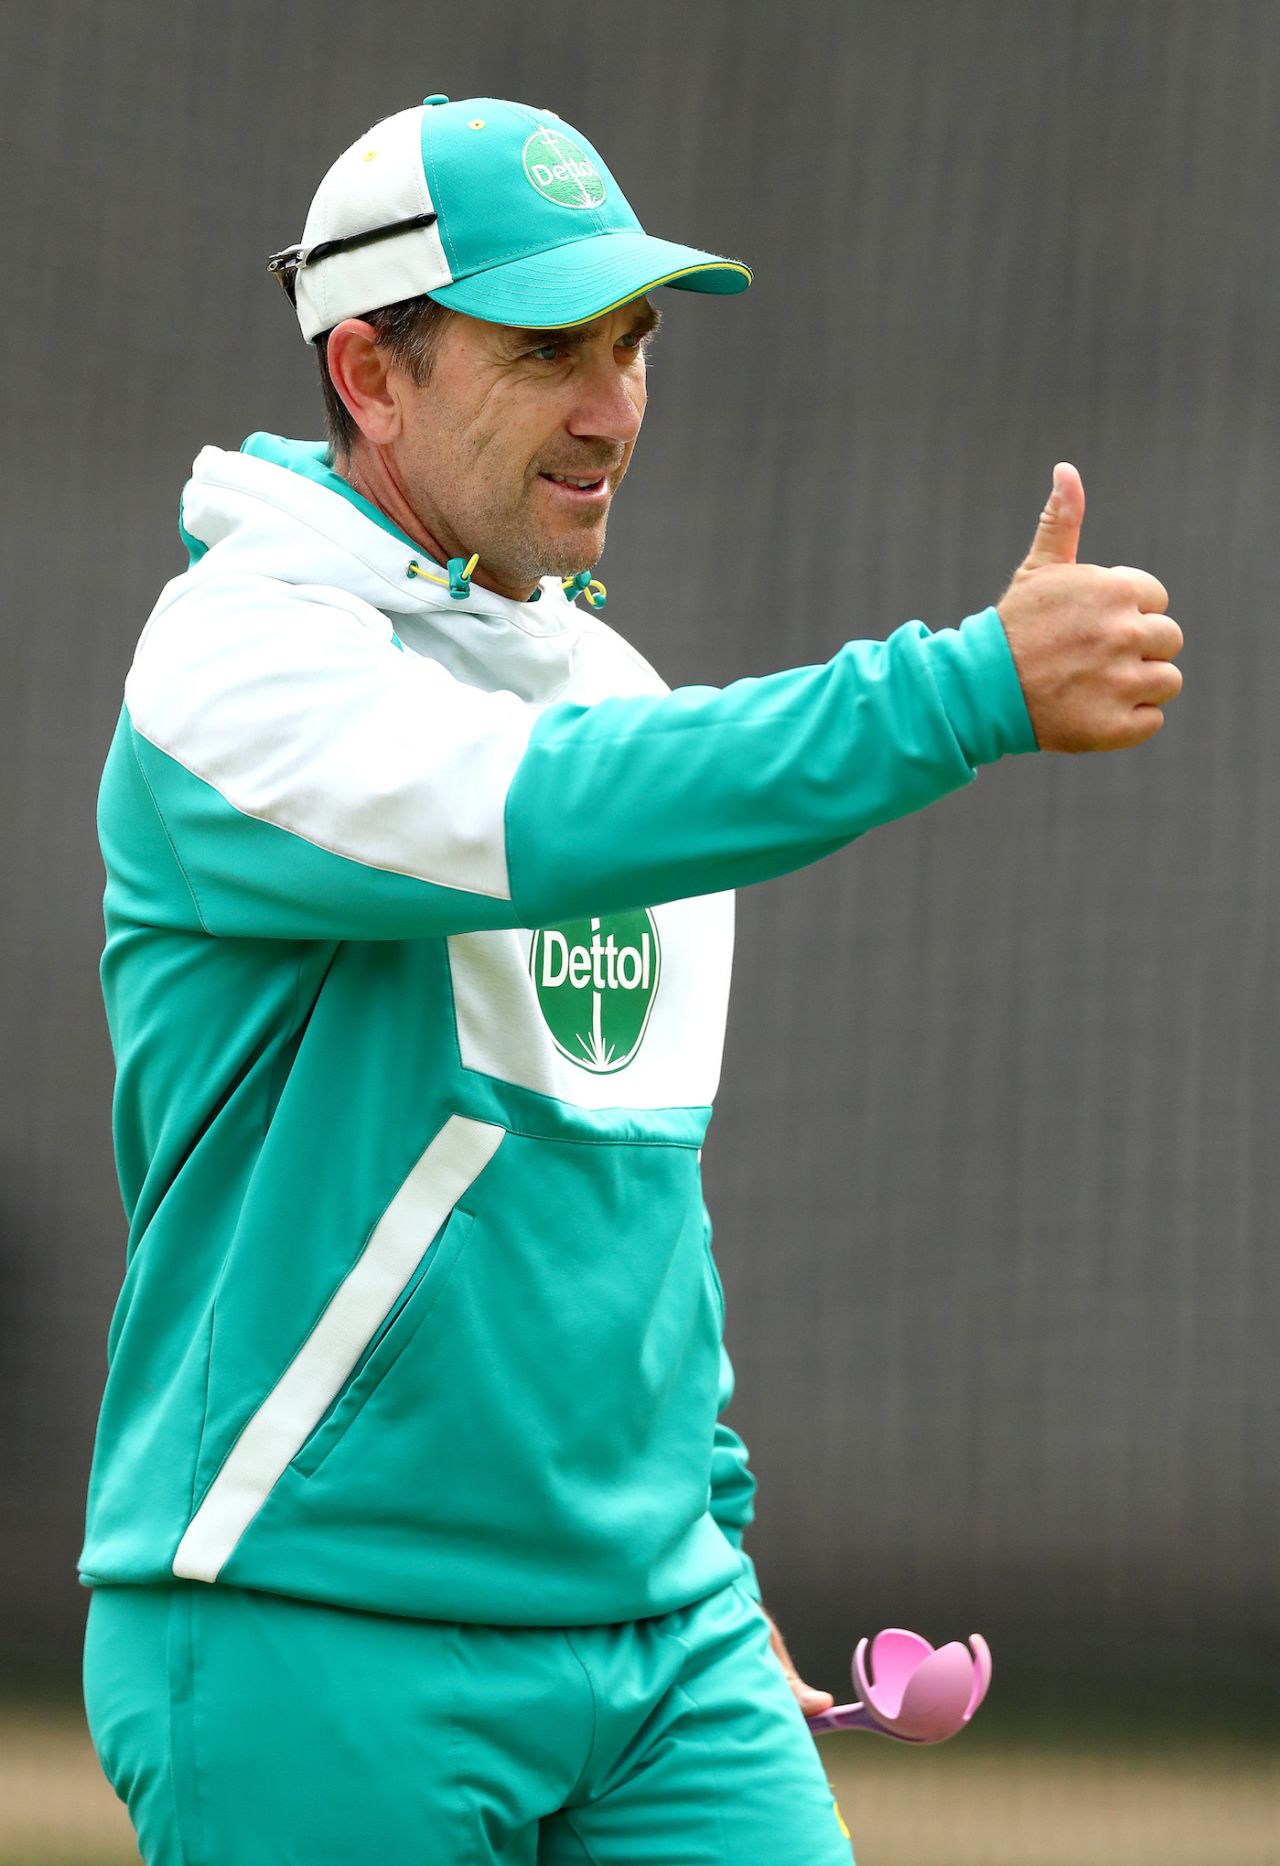 Justin Langer gives a thumbs up during a training session, Melbourne, December 25, 2020